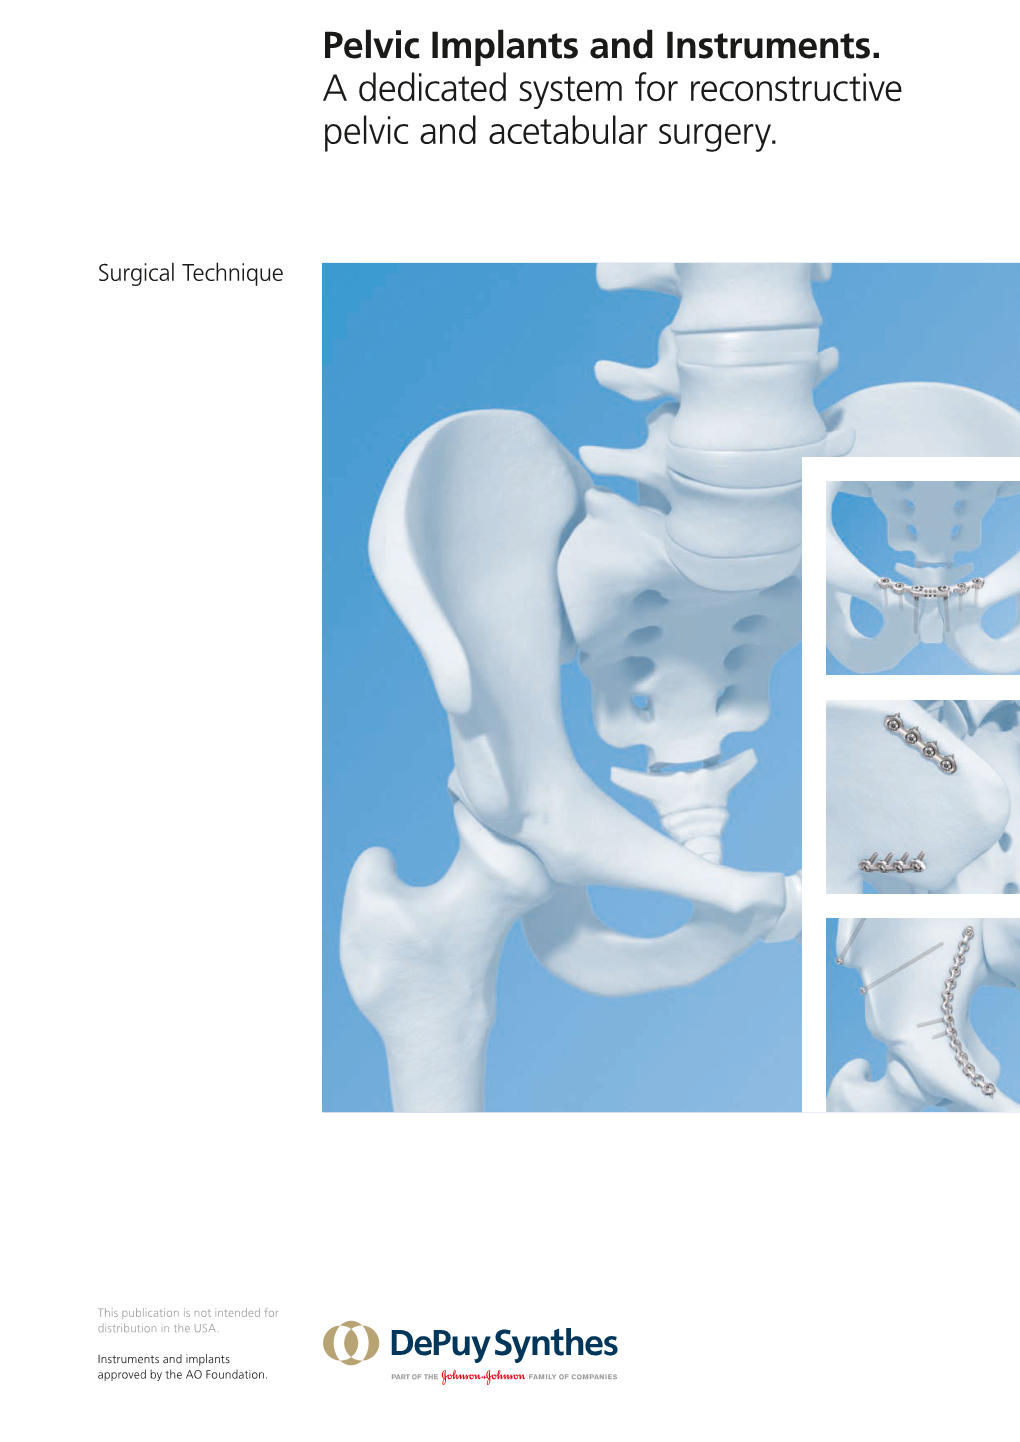 Pelvic Implants and Instruments. a Dedicated System for Reconstructive Pelvic and Acetabular Surgery